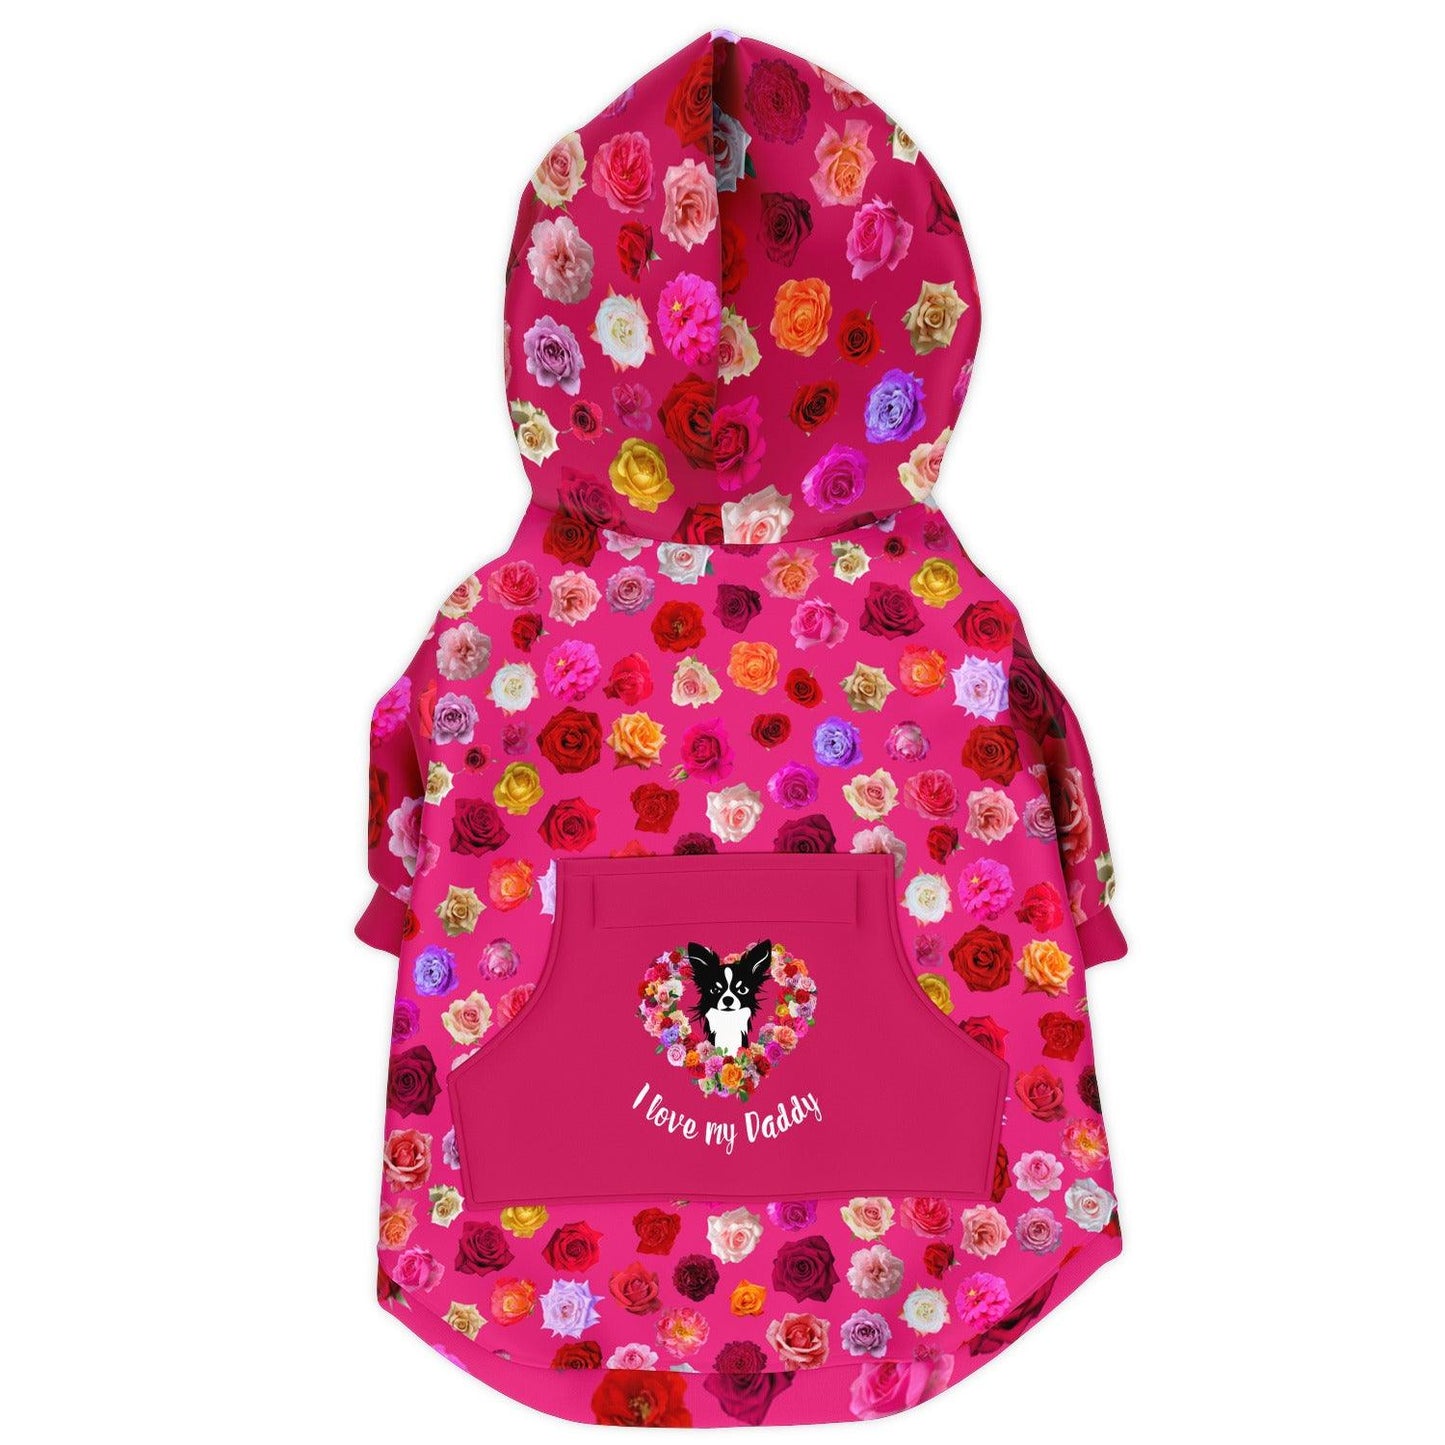 I love my Daddy pink Chihuahua girl hoodie jacket. Covered in roses of many shades. A handy velcro pouch pocket on the back features a chihuahua surrounded by a love heart of roses and the words "I love my Daddy". The chest zips open and the hoodie even comes with an on-trend flat drawstring. So cute! The inside is brushed fleece to keep your chi cosy on walkies, or on cold winter nights cuddling on the sofa. Design by Renate Kriegler for Chimigos.